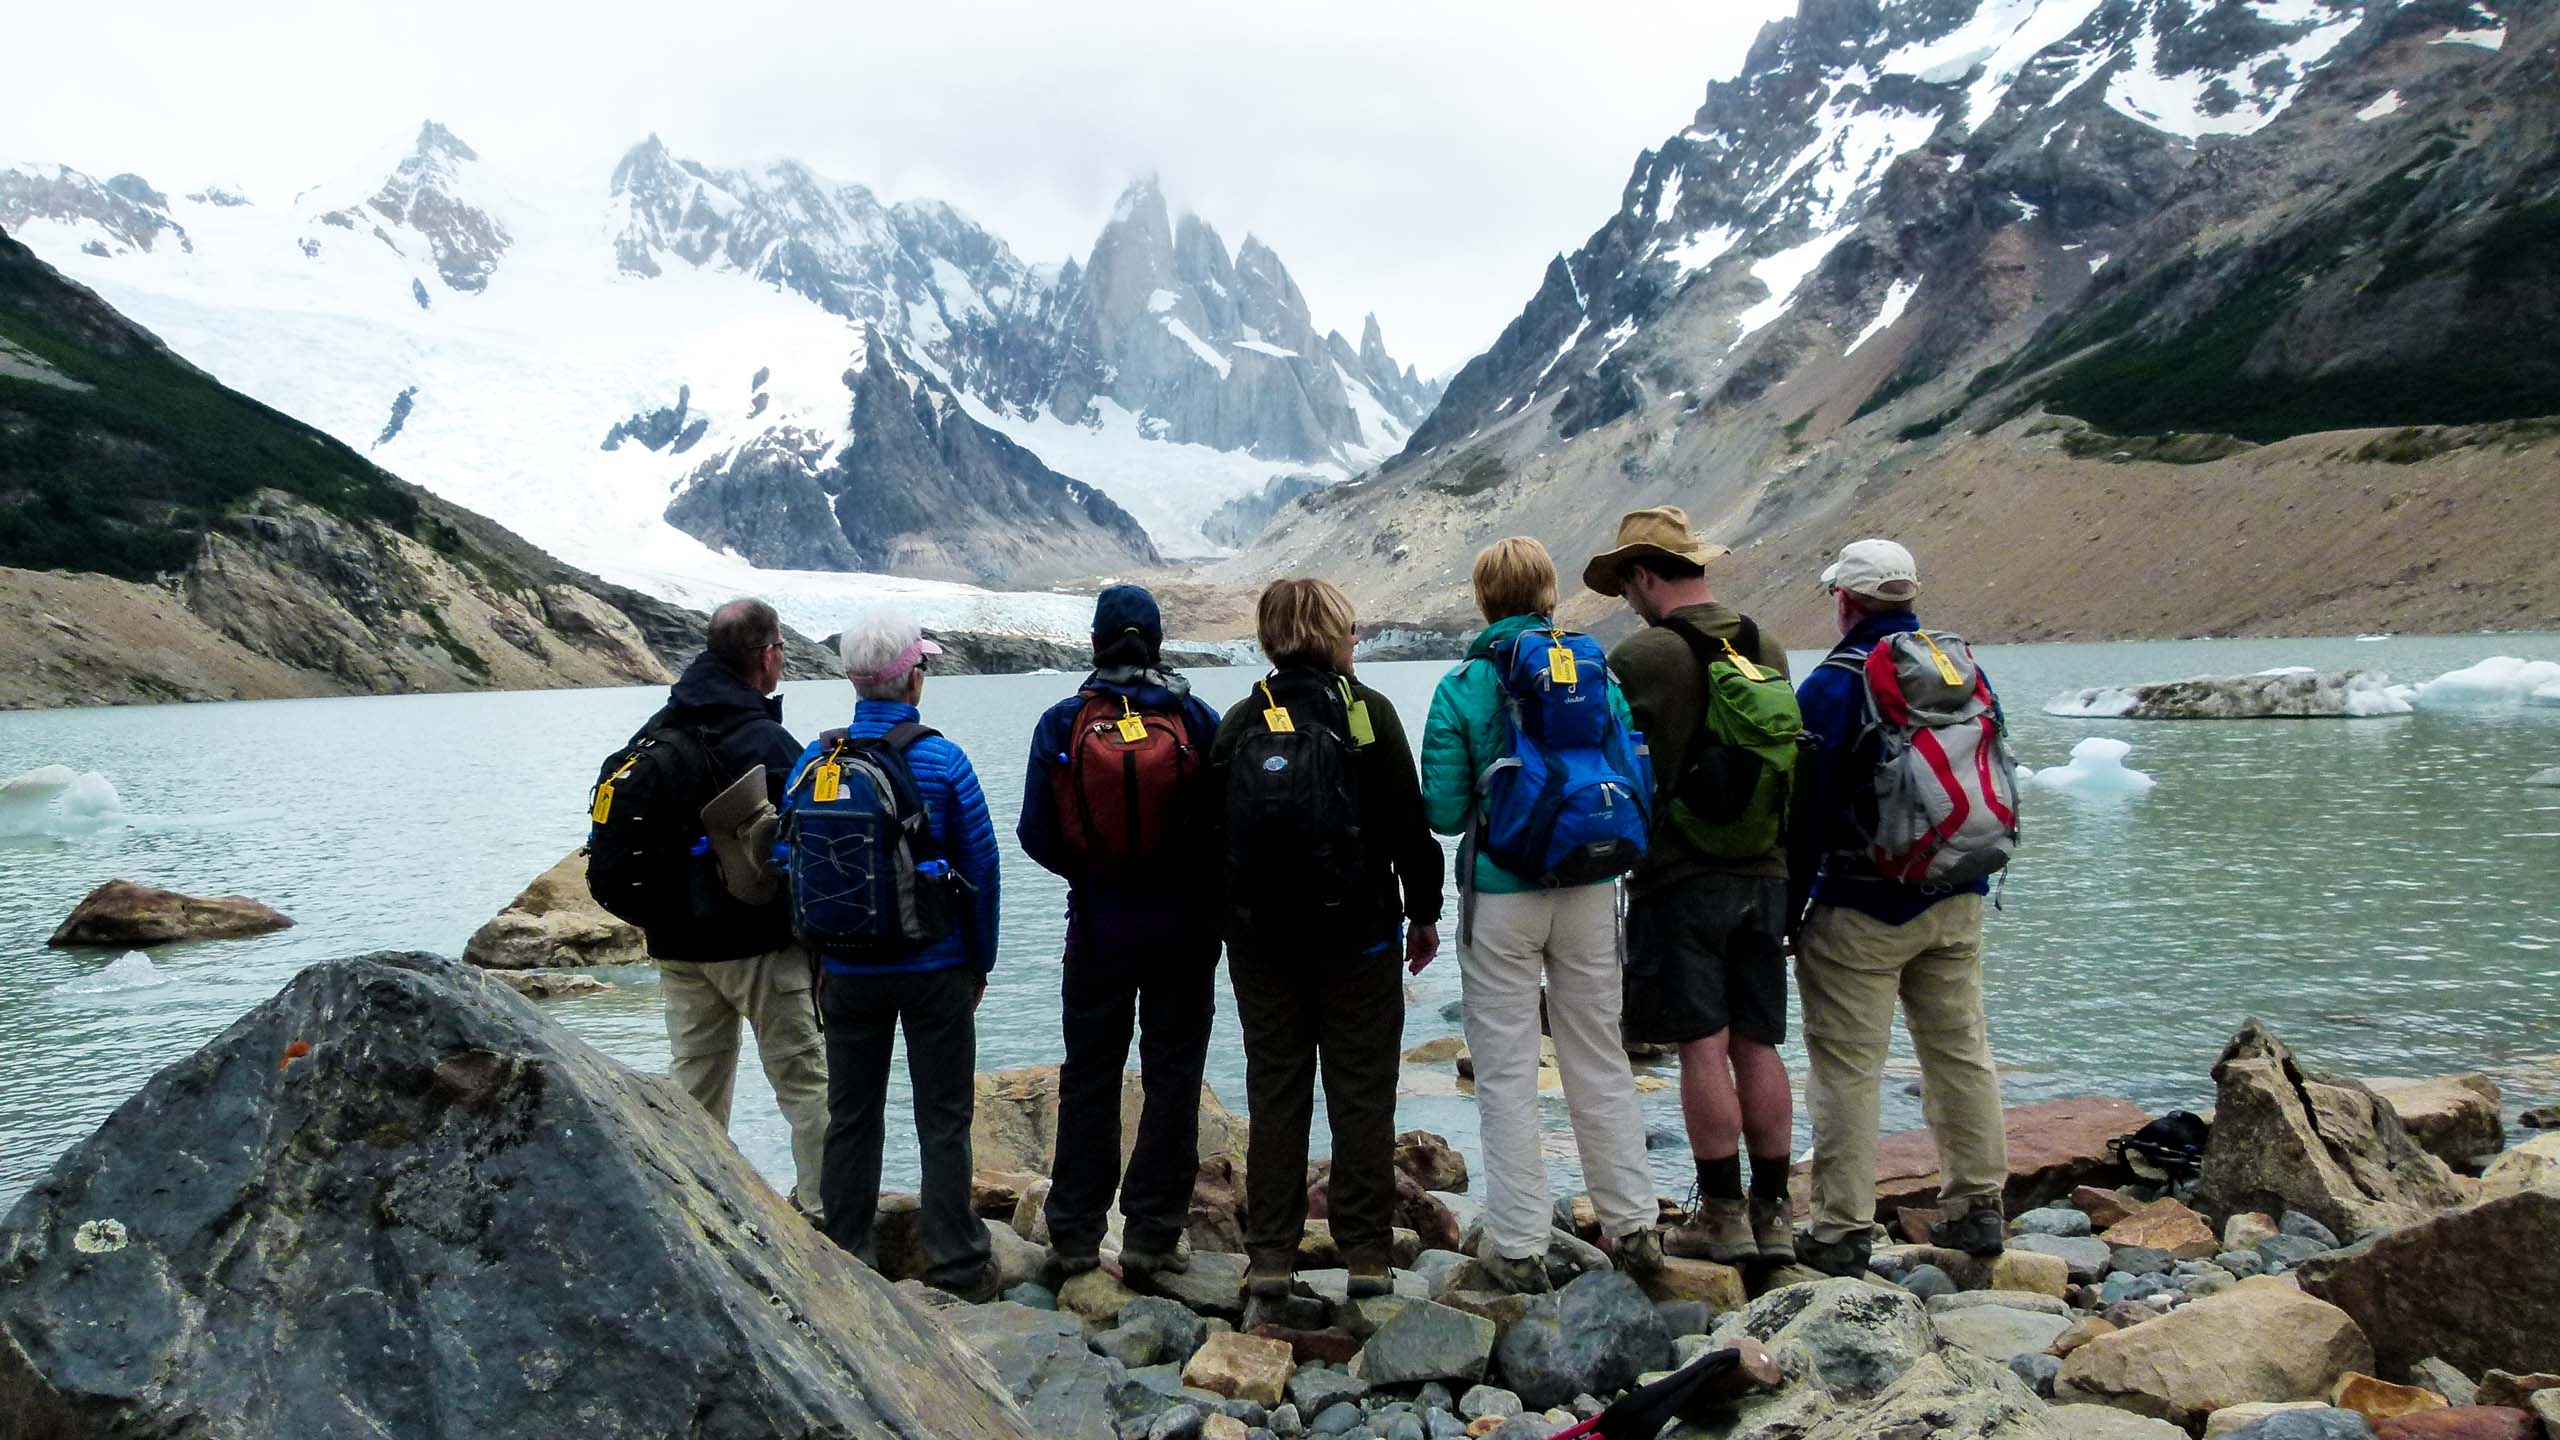 Argentina hiking group stands in front of mountain lake